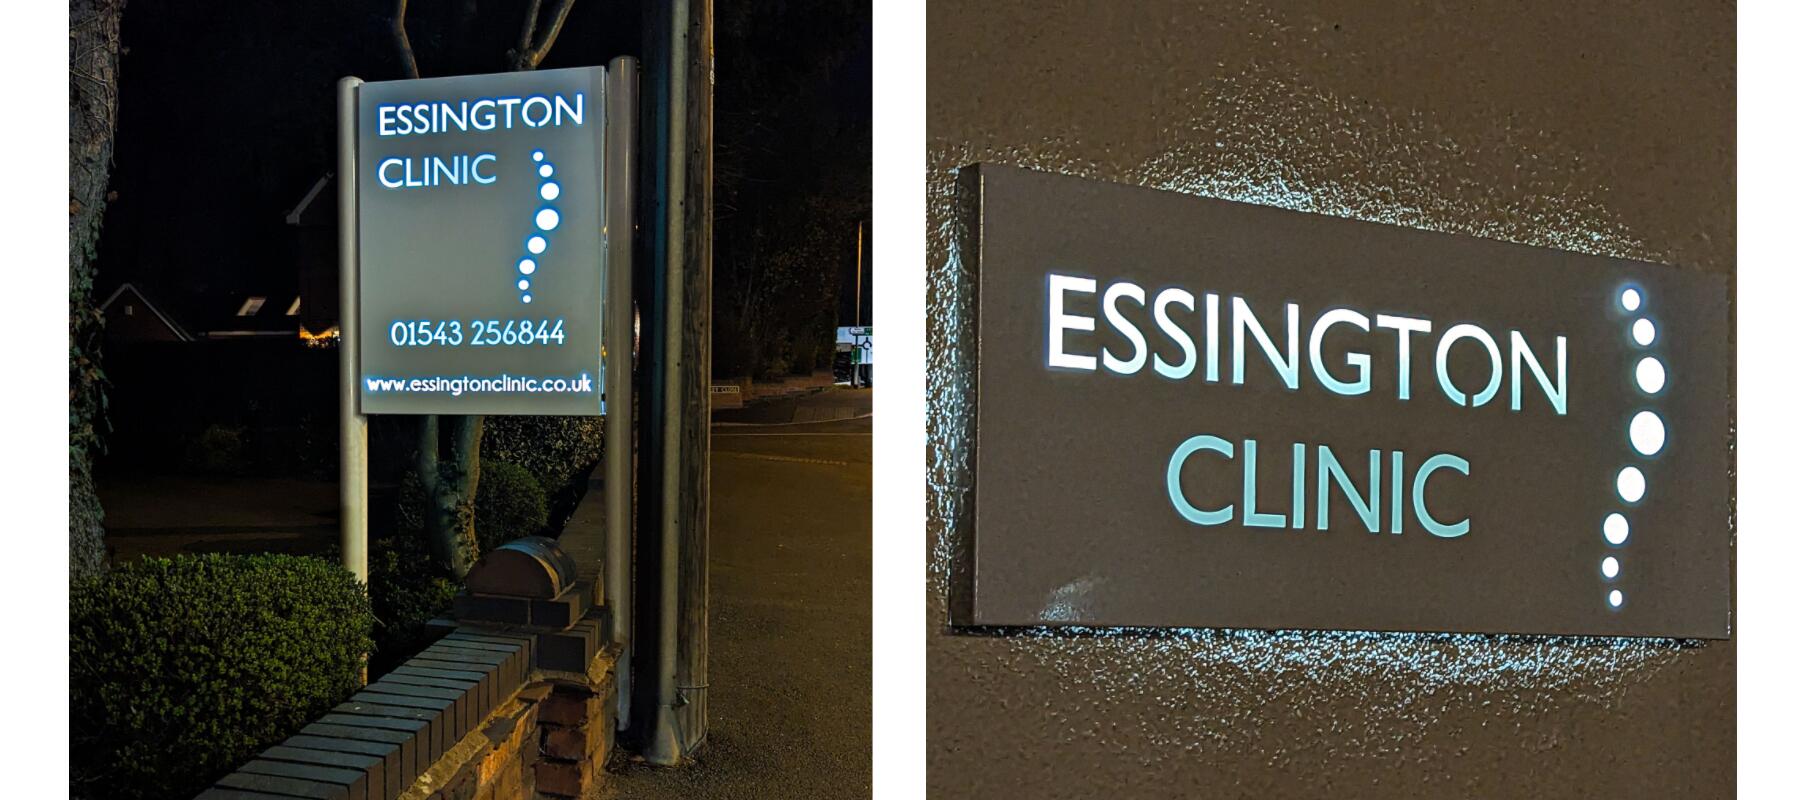 Illuminated Business signs from Rees Metal Designs